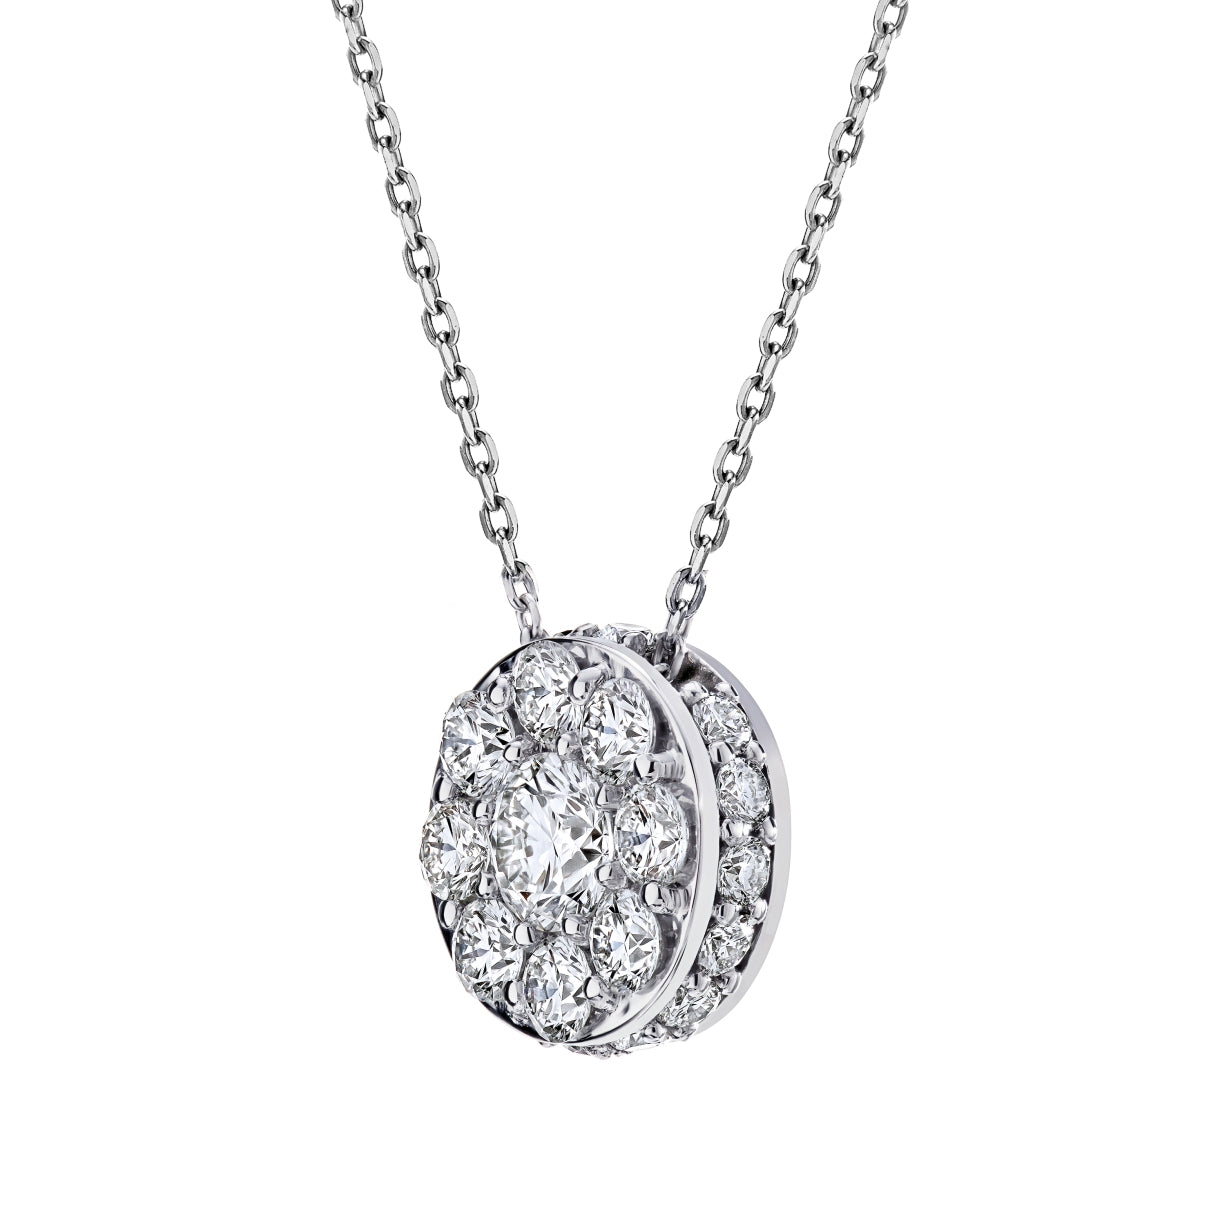 Spark Diamond Illusion Necklace 18KW or 18KY